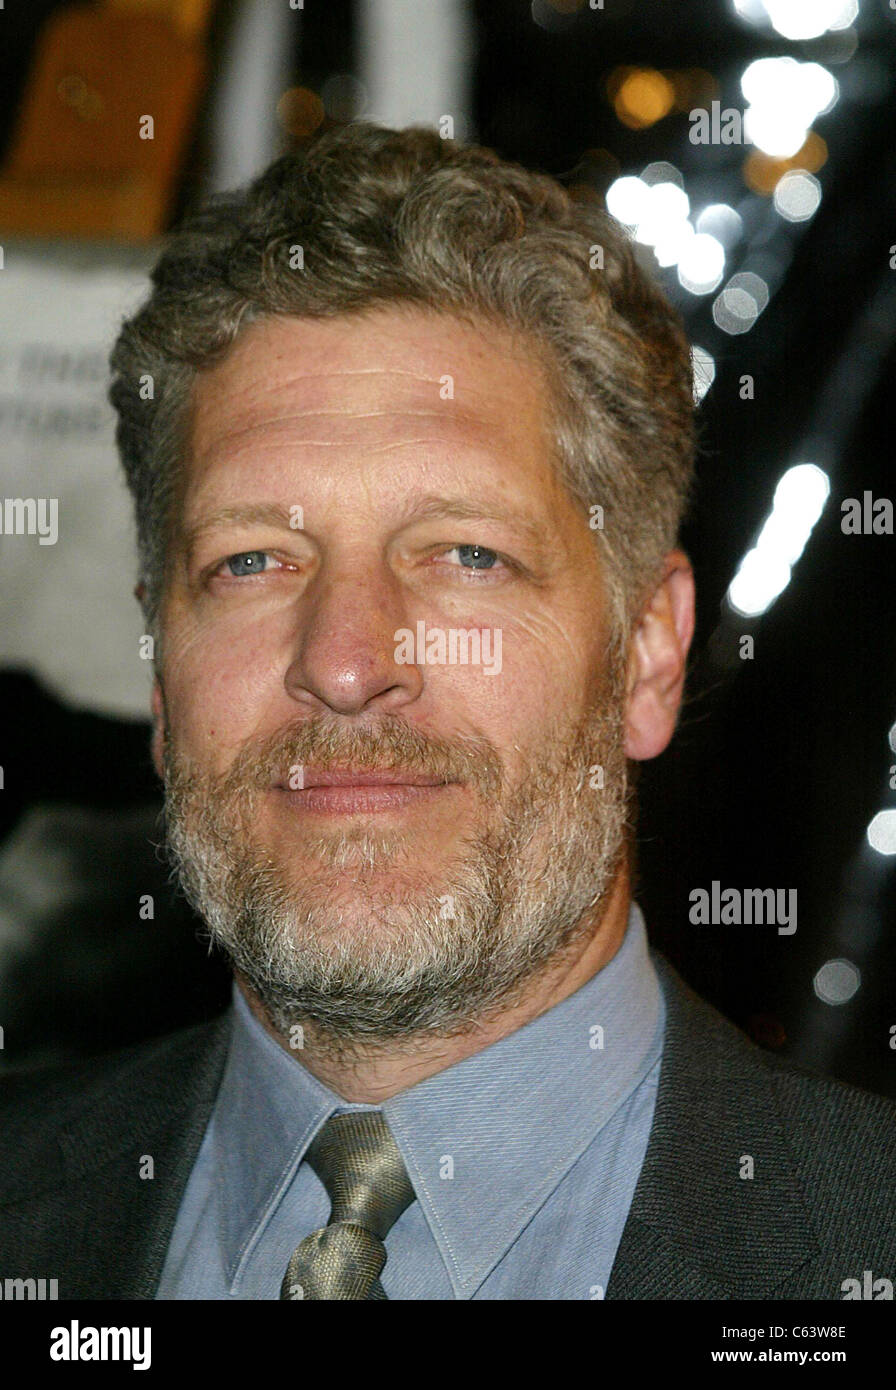 Clancy Brown at HBO Carnivale 2nd Season Premiere Party, Los Angeles, CA January 06, 2005. Photo by: Emilio Flores/Everett Collection Stock Photo